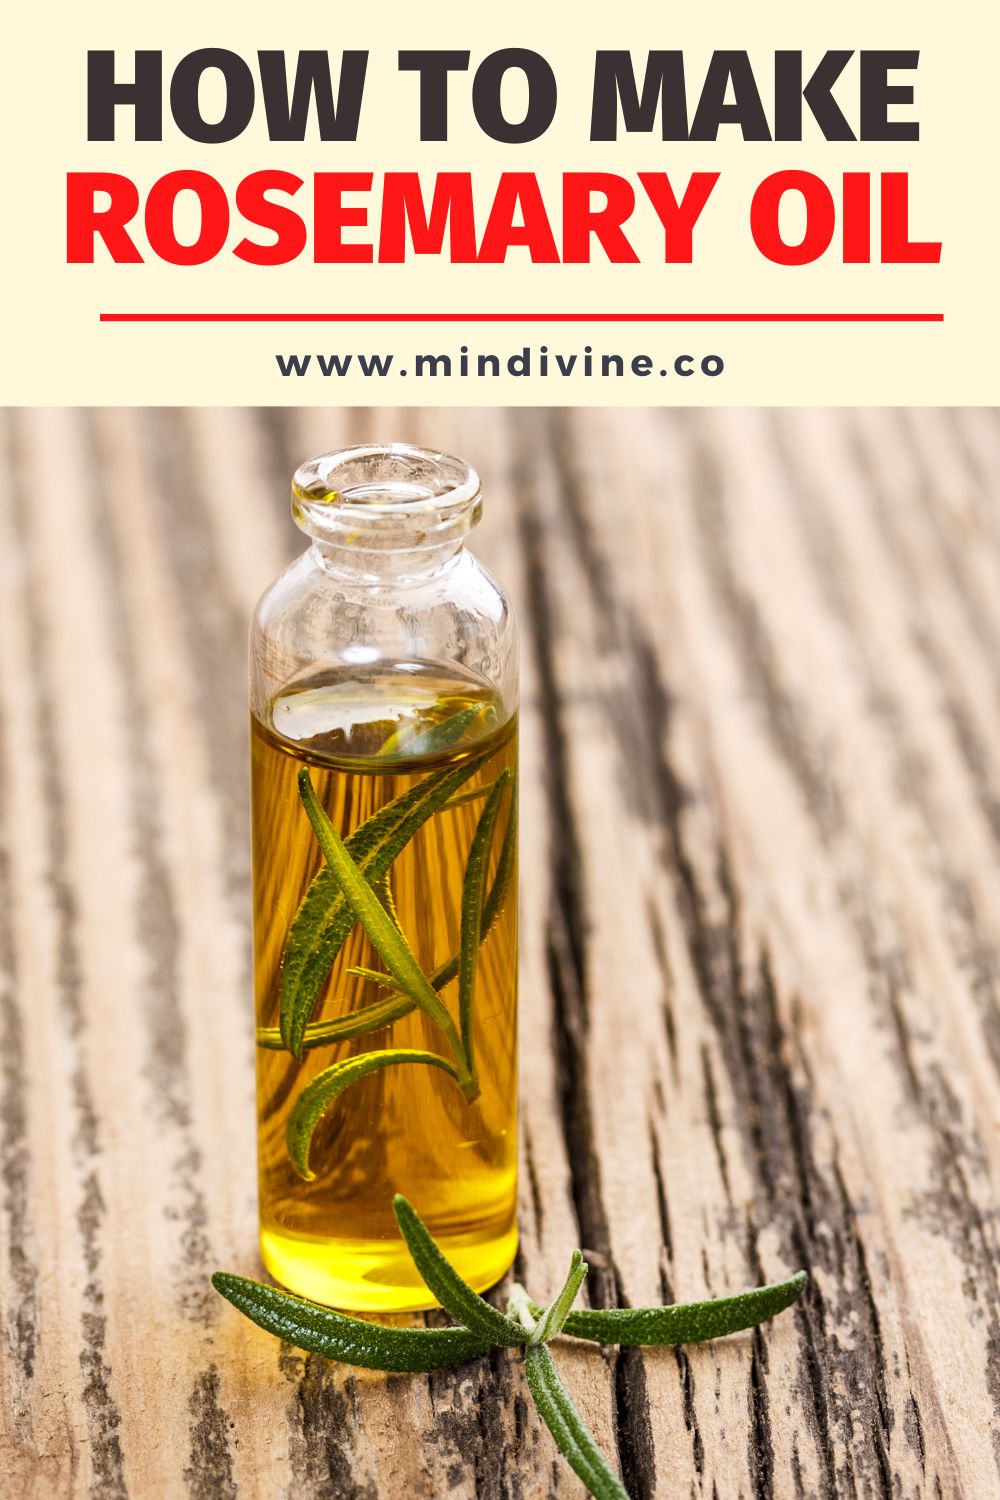 How to make rosemary oil with this easy recipe.